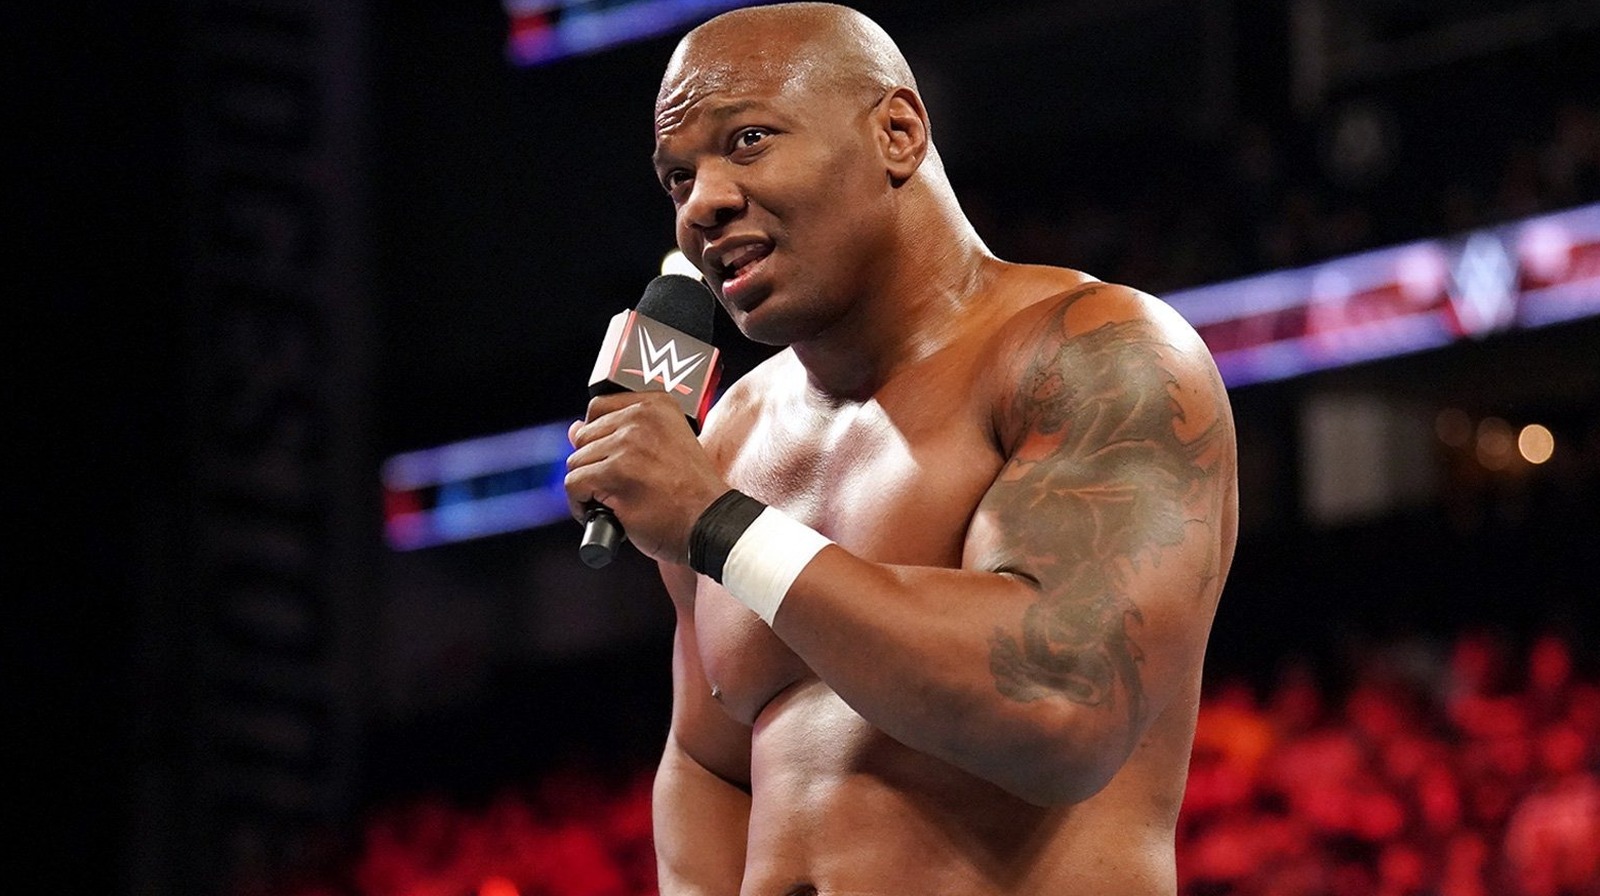 Why Max Caster Doesn't Want Shelton Benjamin In AEW